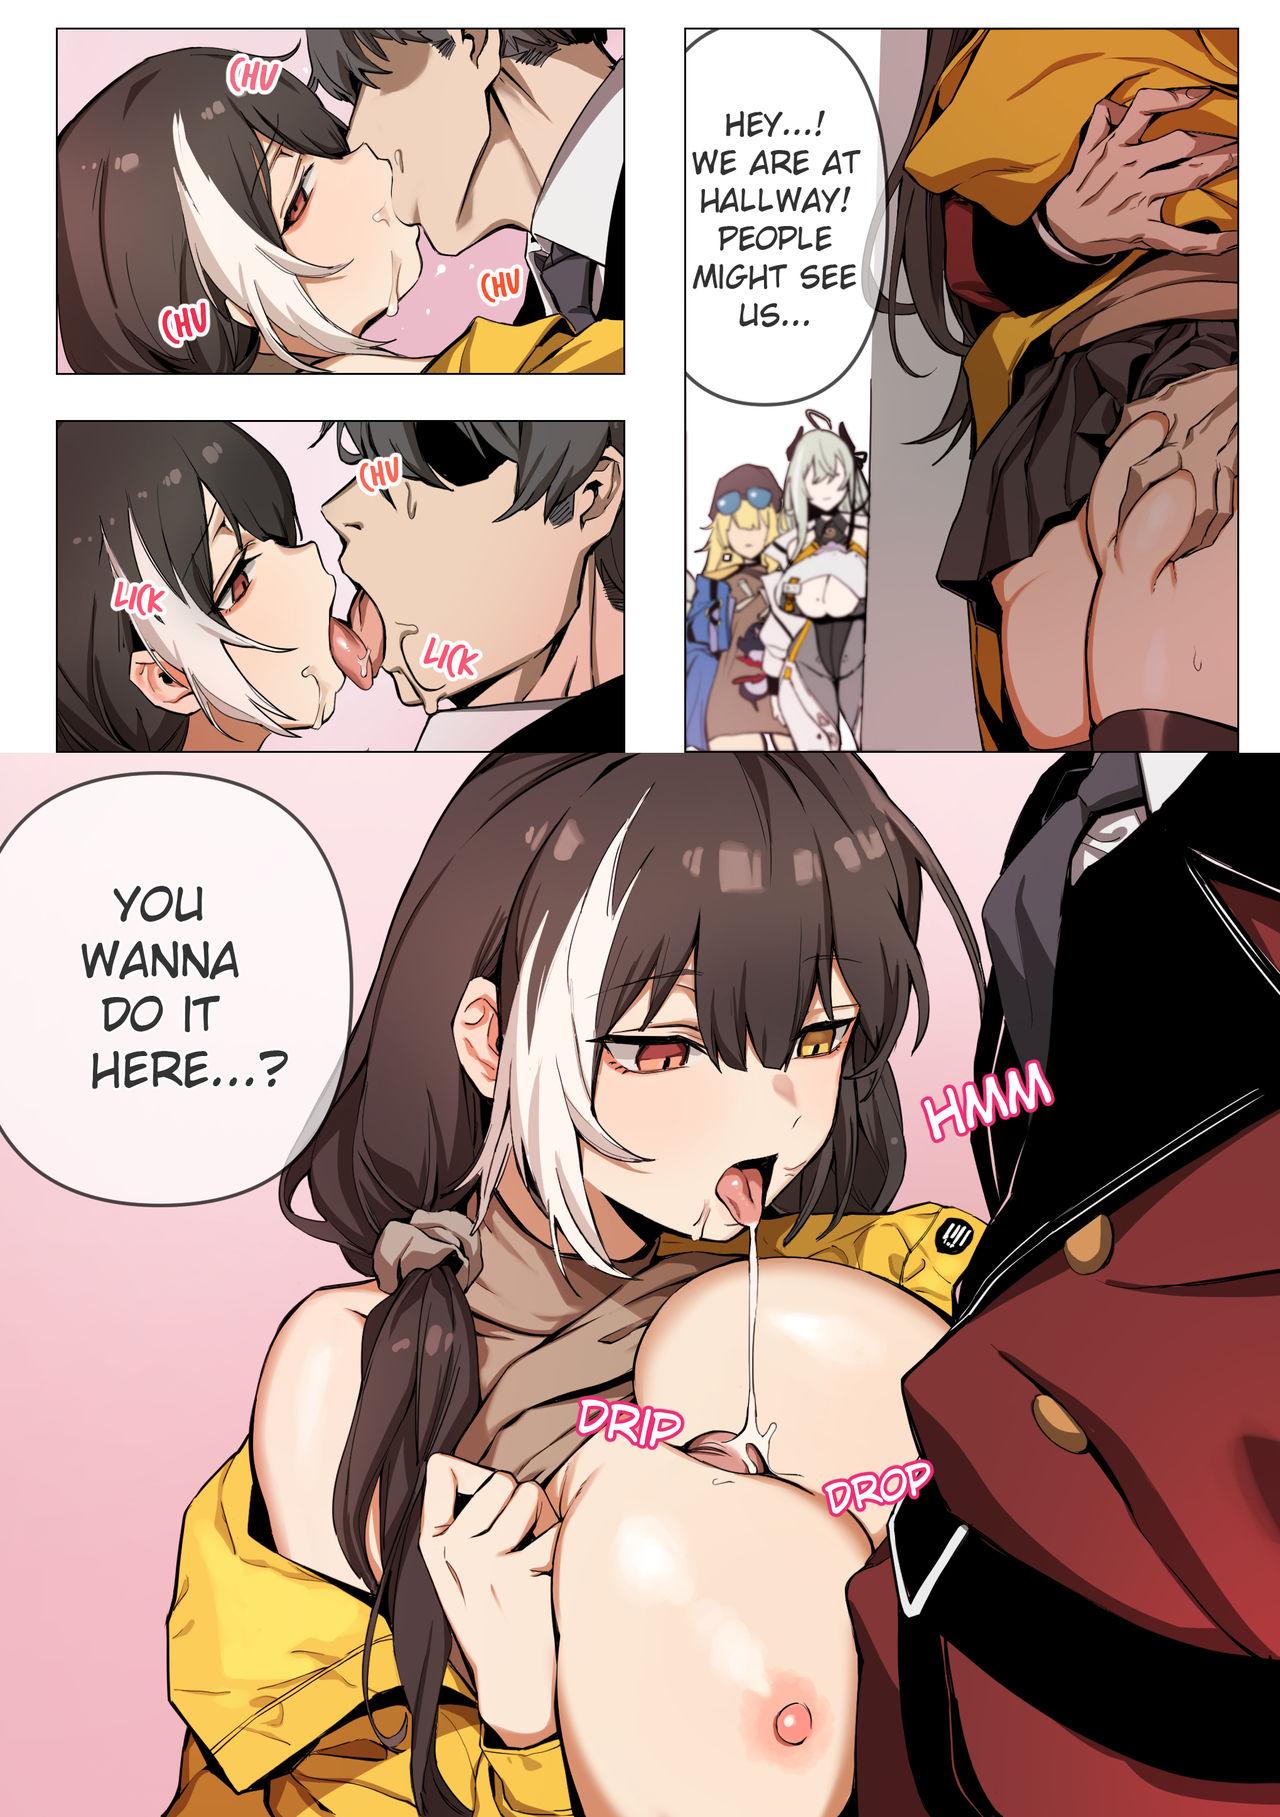 Hot Milf ro635 - Girls frontline Canadian - Page 3